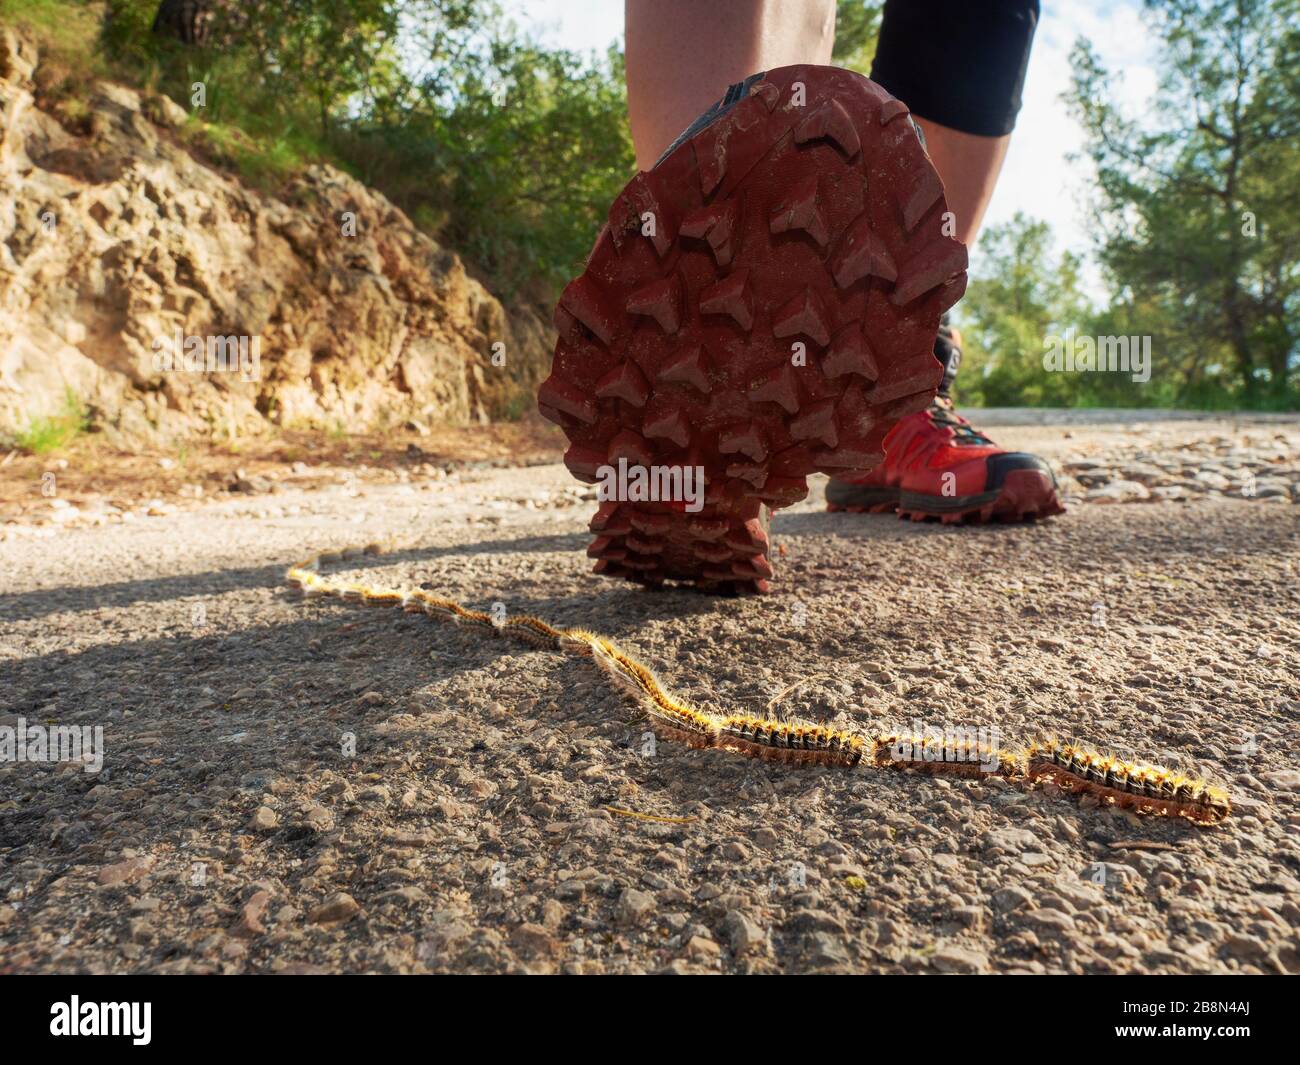 Running shoe will step on row of danger tree caterpillars. Caterpillars looking for green leaves. Stock Photo